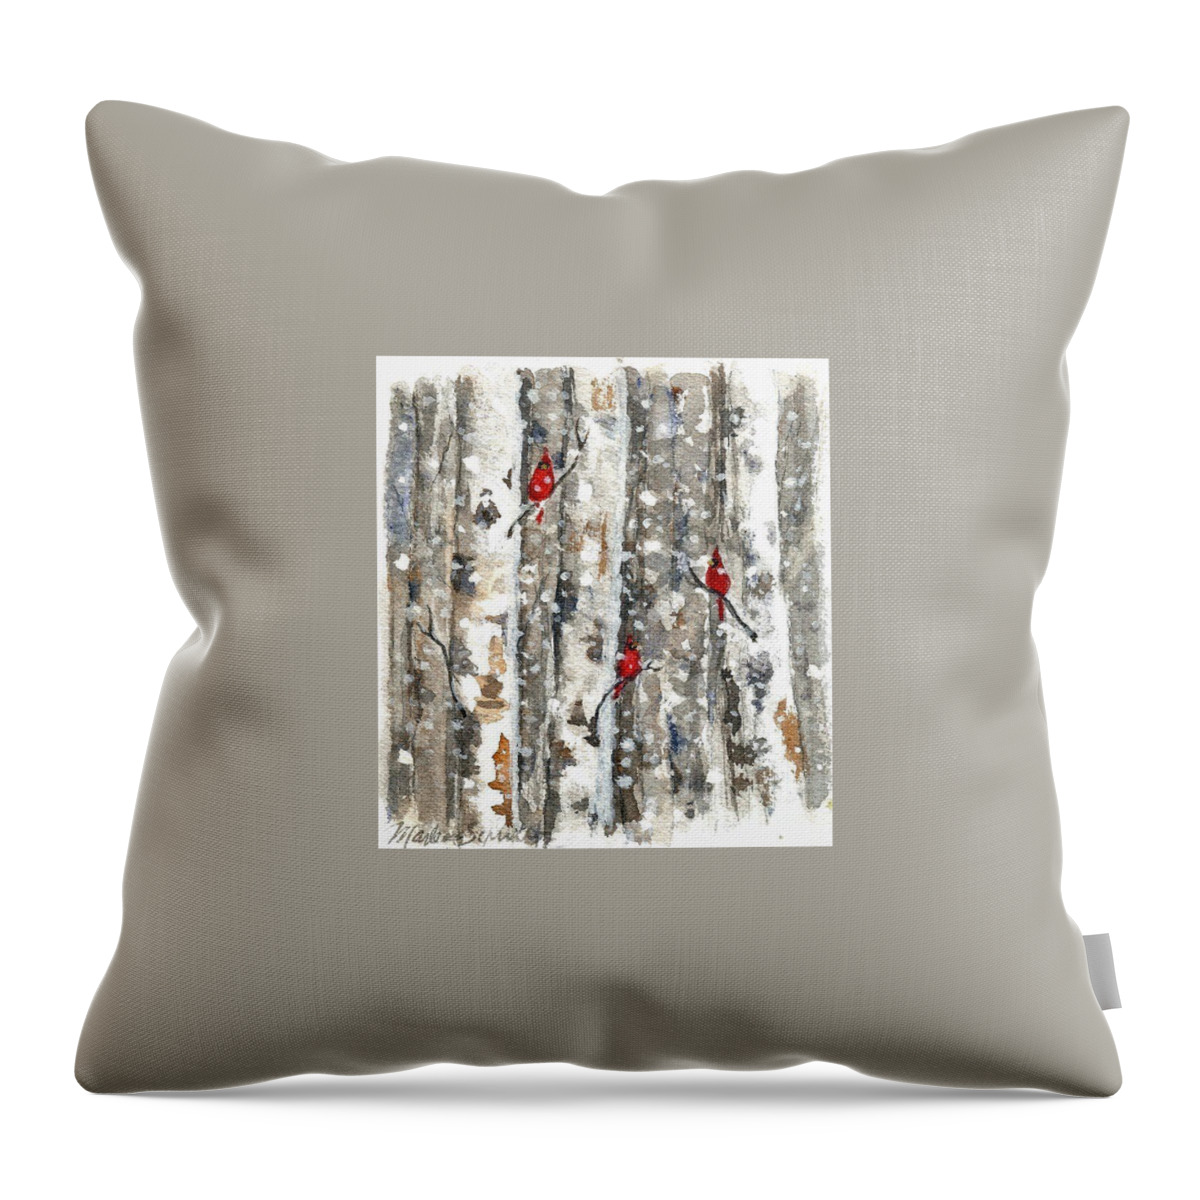 Cardinals Throw Pillow featuring the painting Woodland Cardilals by Marlene Schwartz Massey